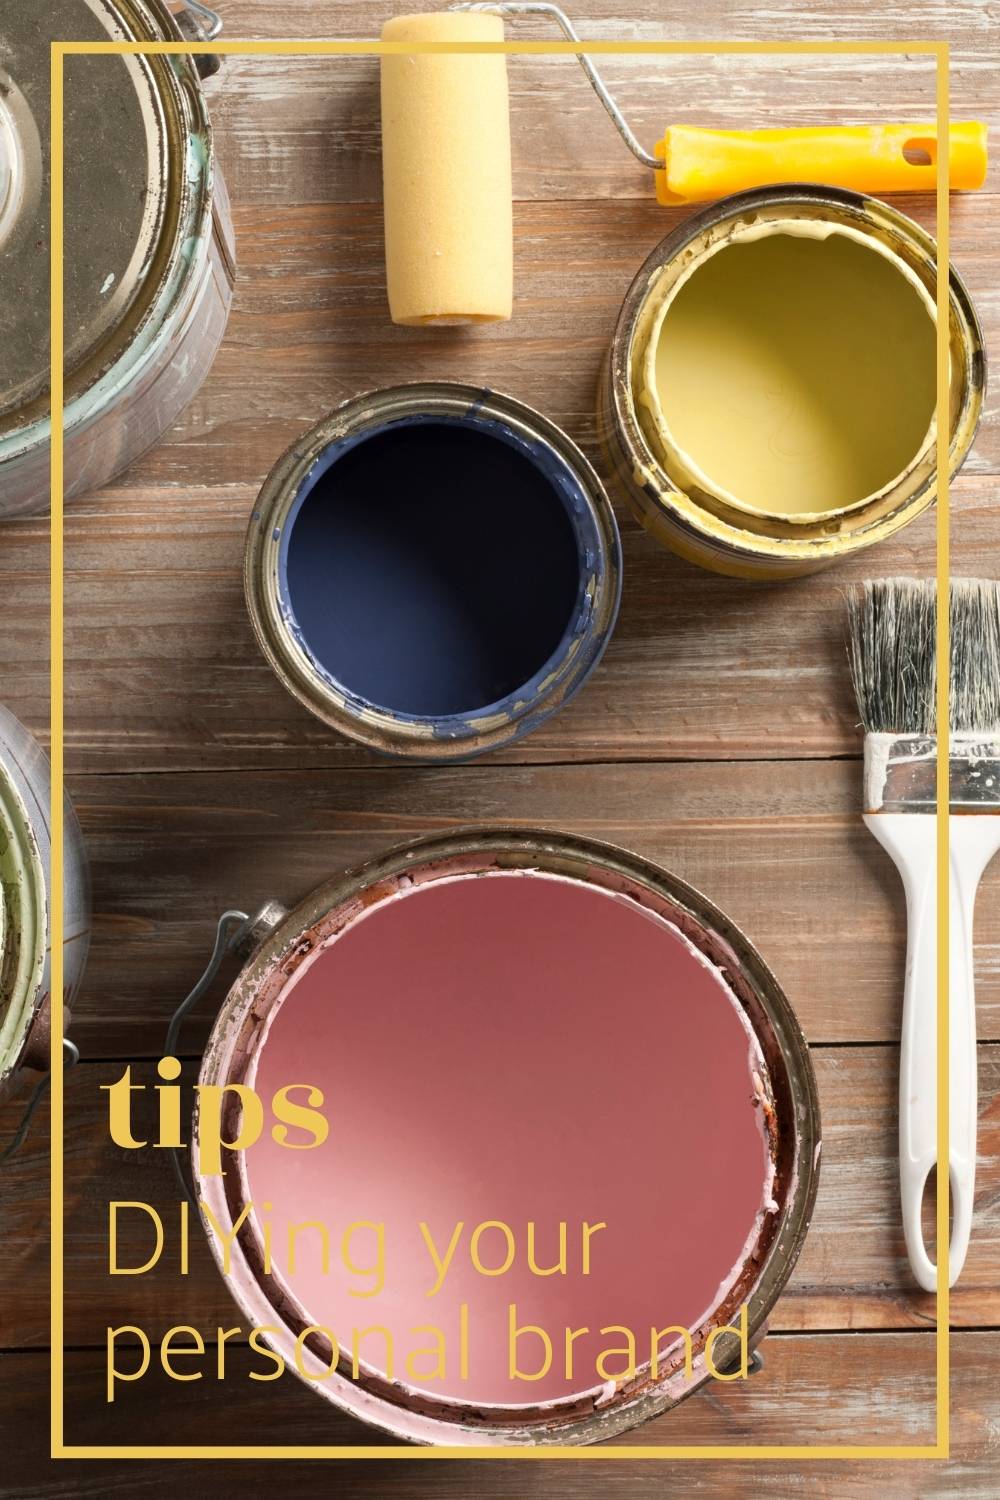 The Truth about DIYing Your Personal Brand Photo of Paint Cans